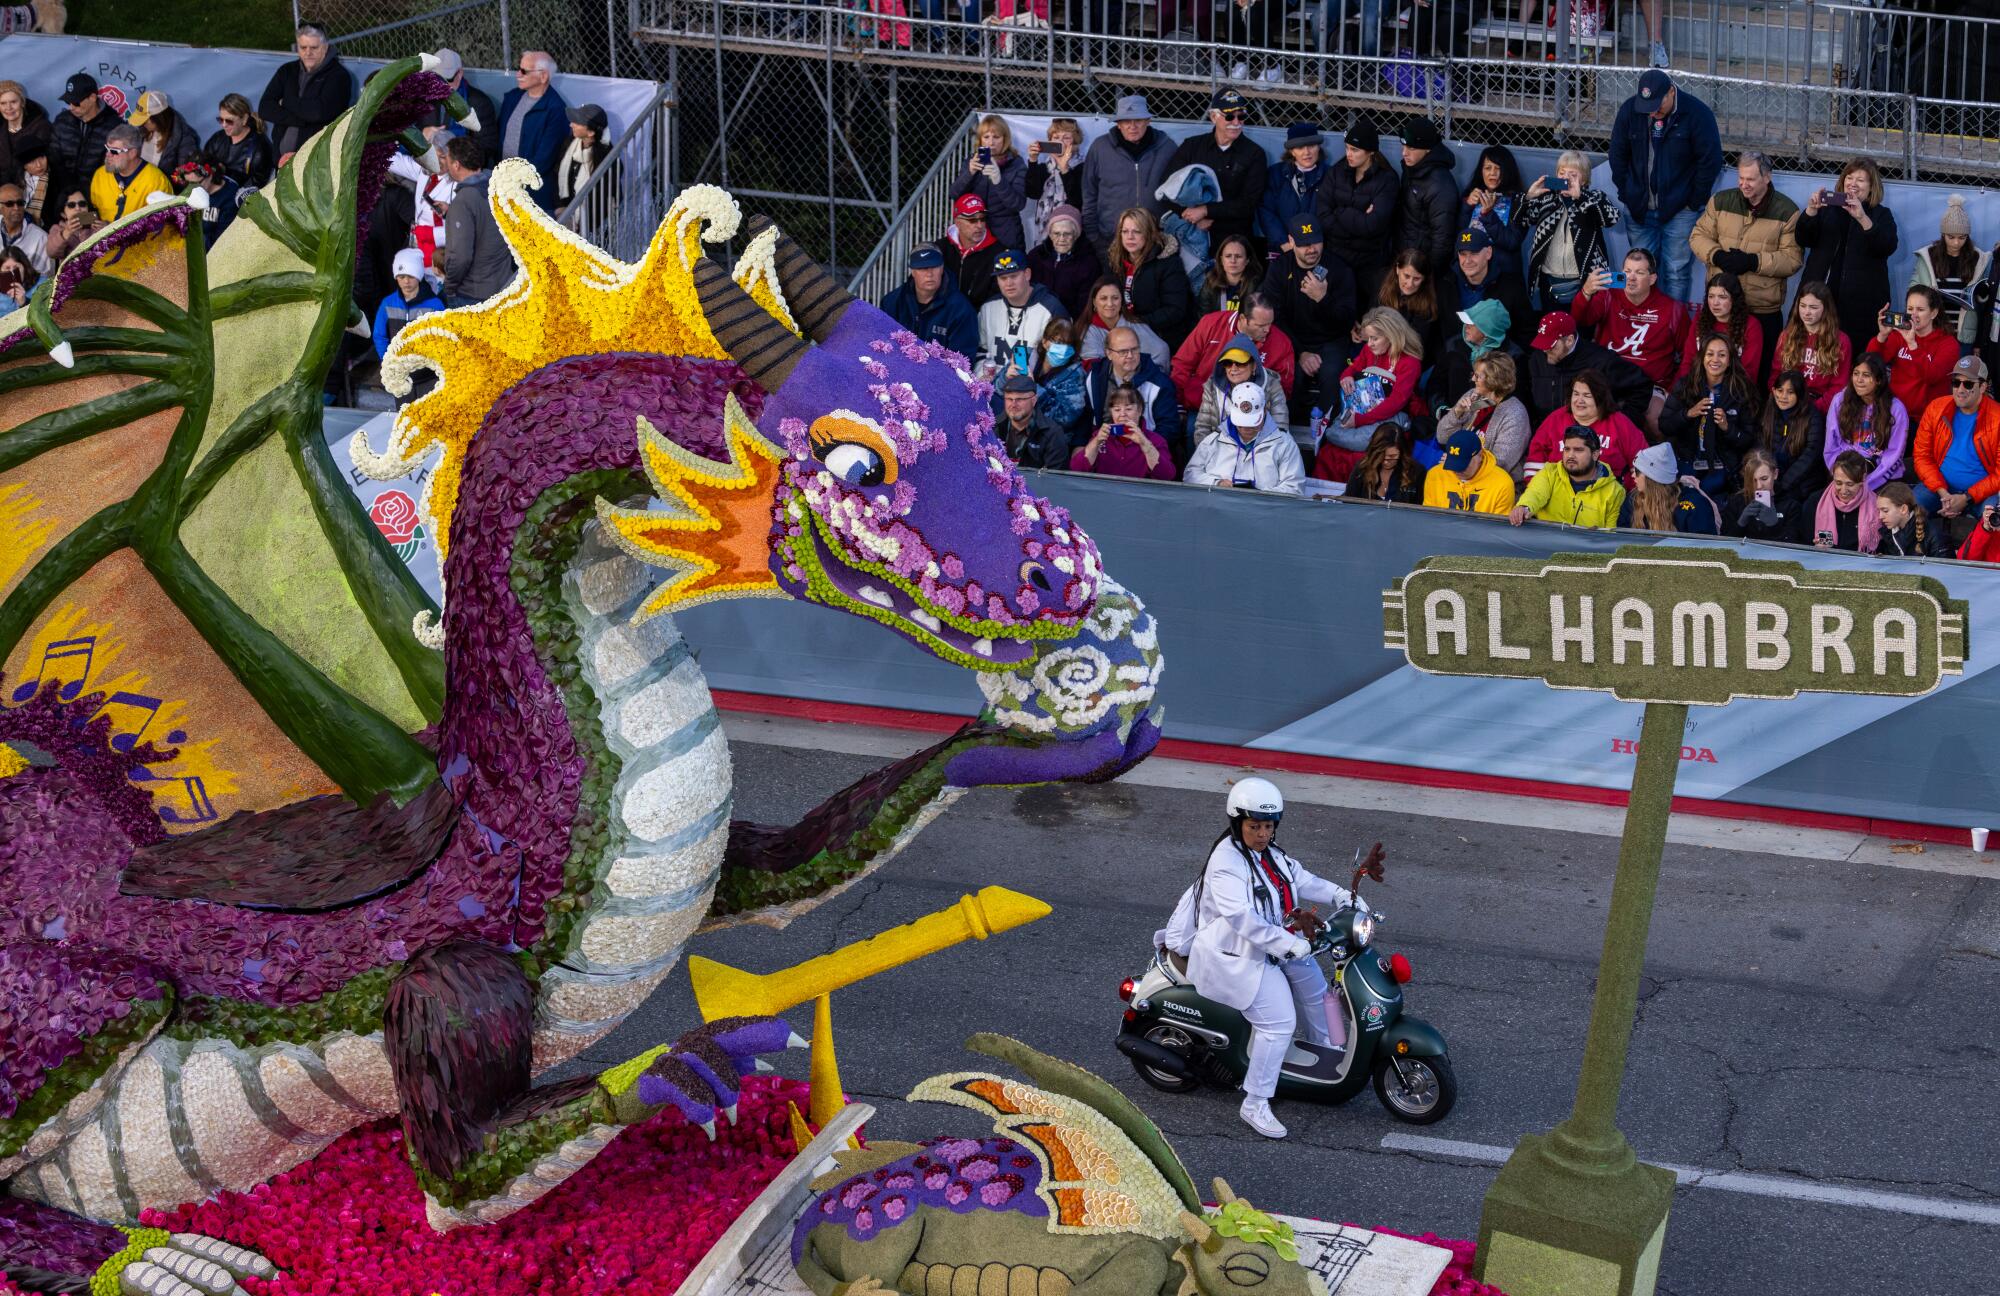 The City of Alhambra's Year of the Dragon-themed float at the Rose Parade.